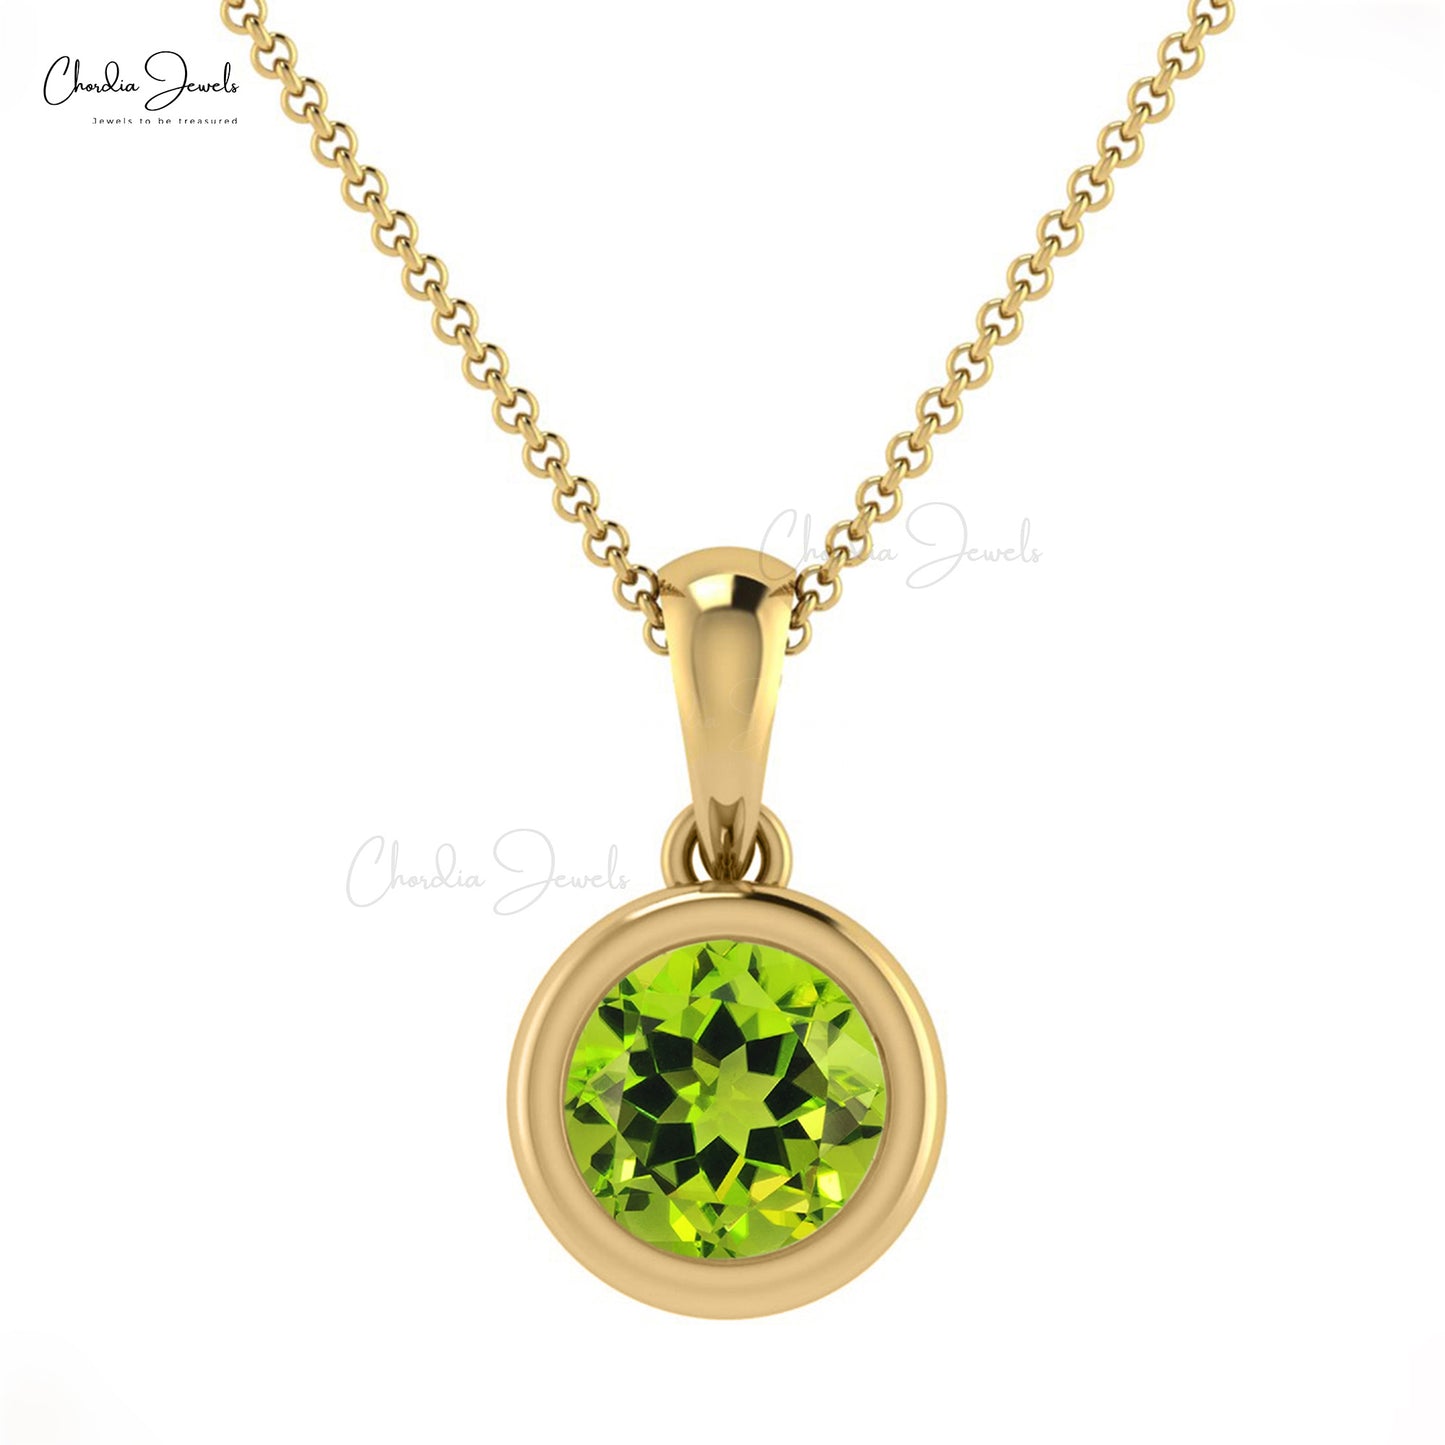 Best Selling Luxury Fashionable Natural Green Peridot Solitaire Pendant Necklace 5mm Round Gemstone Pendant 14k Real Gold Fine Jewelry For Women